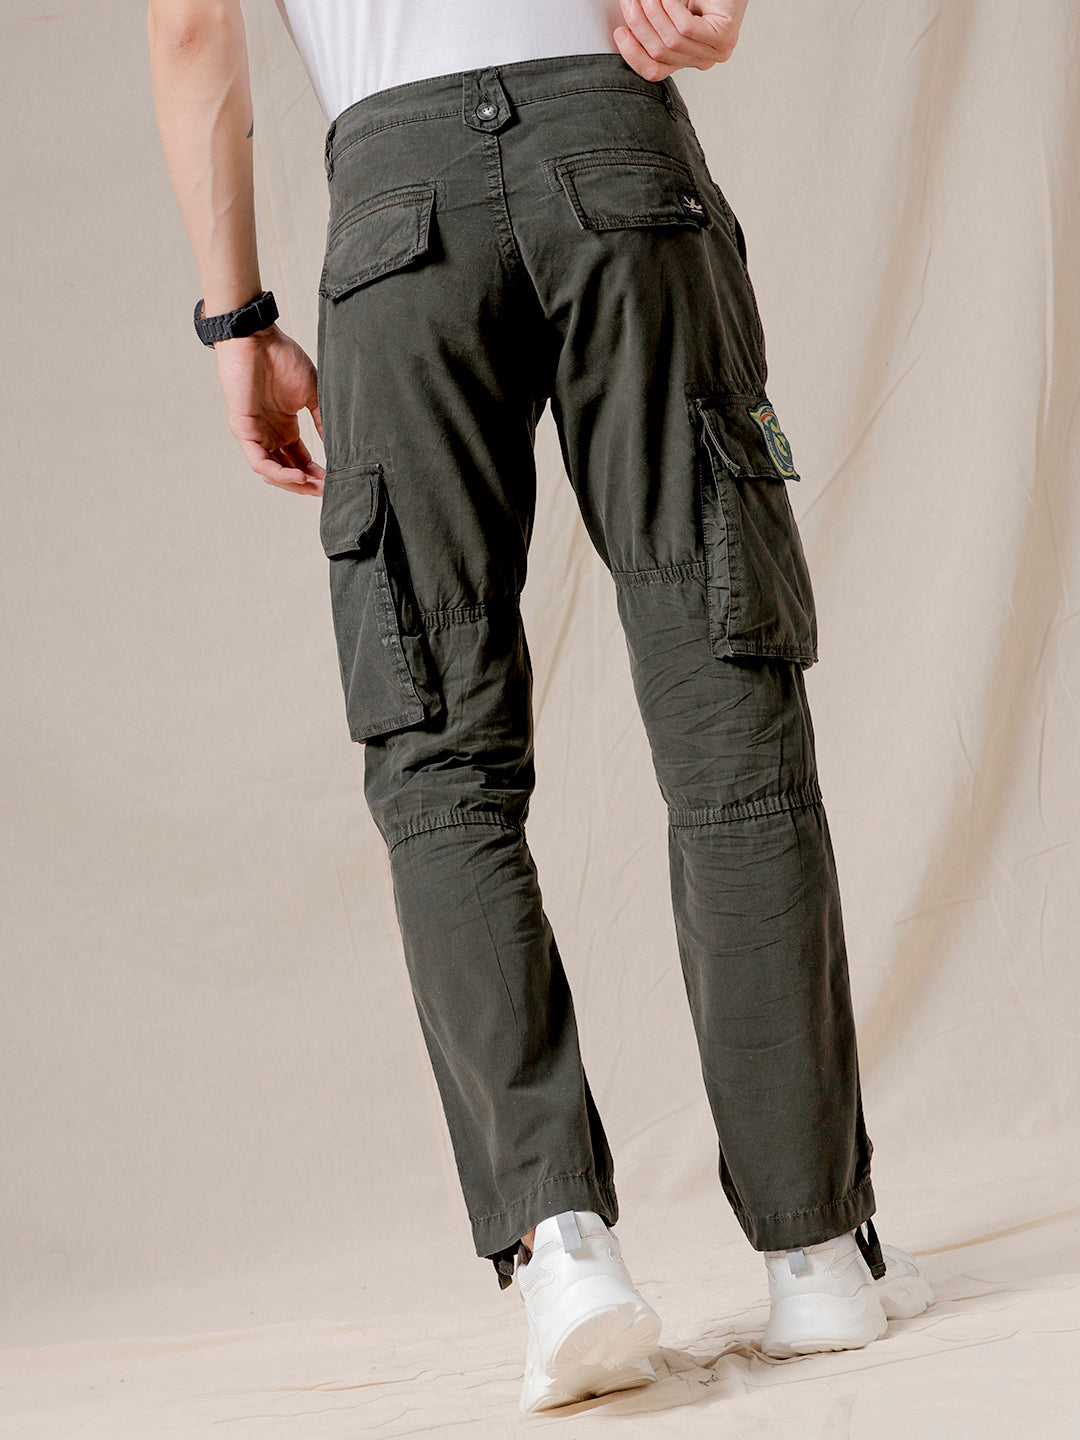 Indian Infantry By A47 Olive Drip Cargo Pants – Wrogn